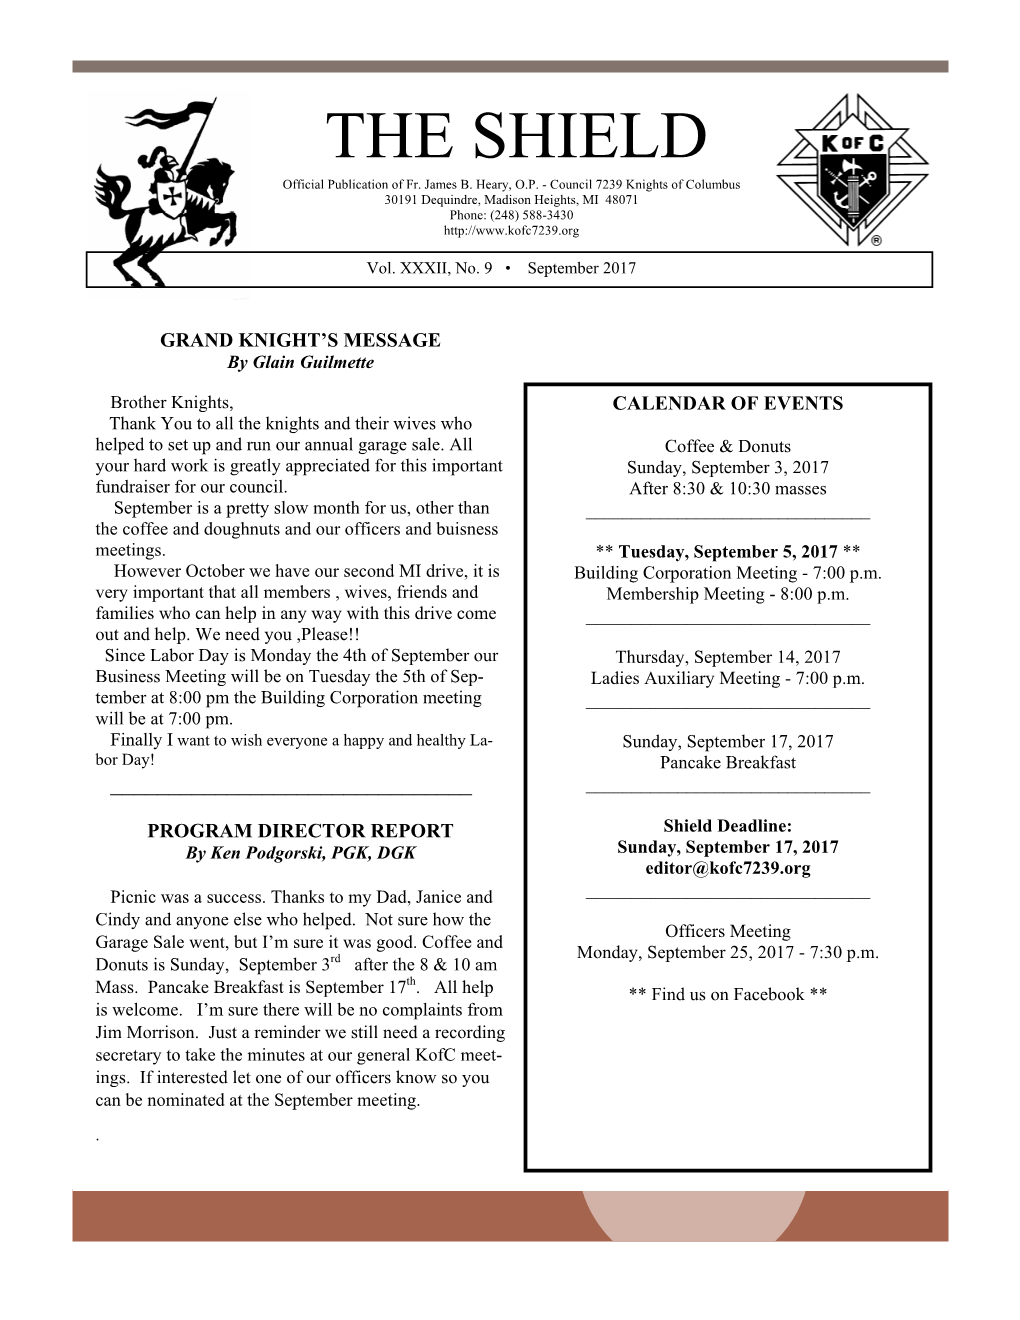 THE SHIELD Official Publication of Fr